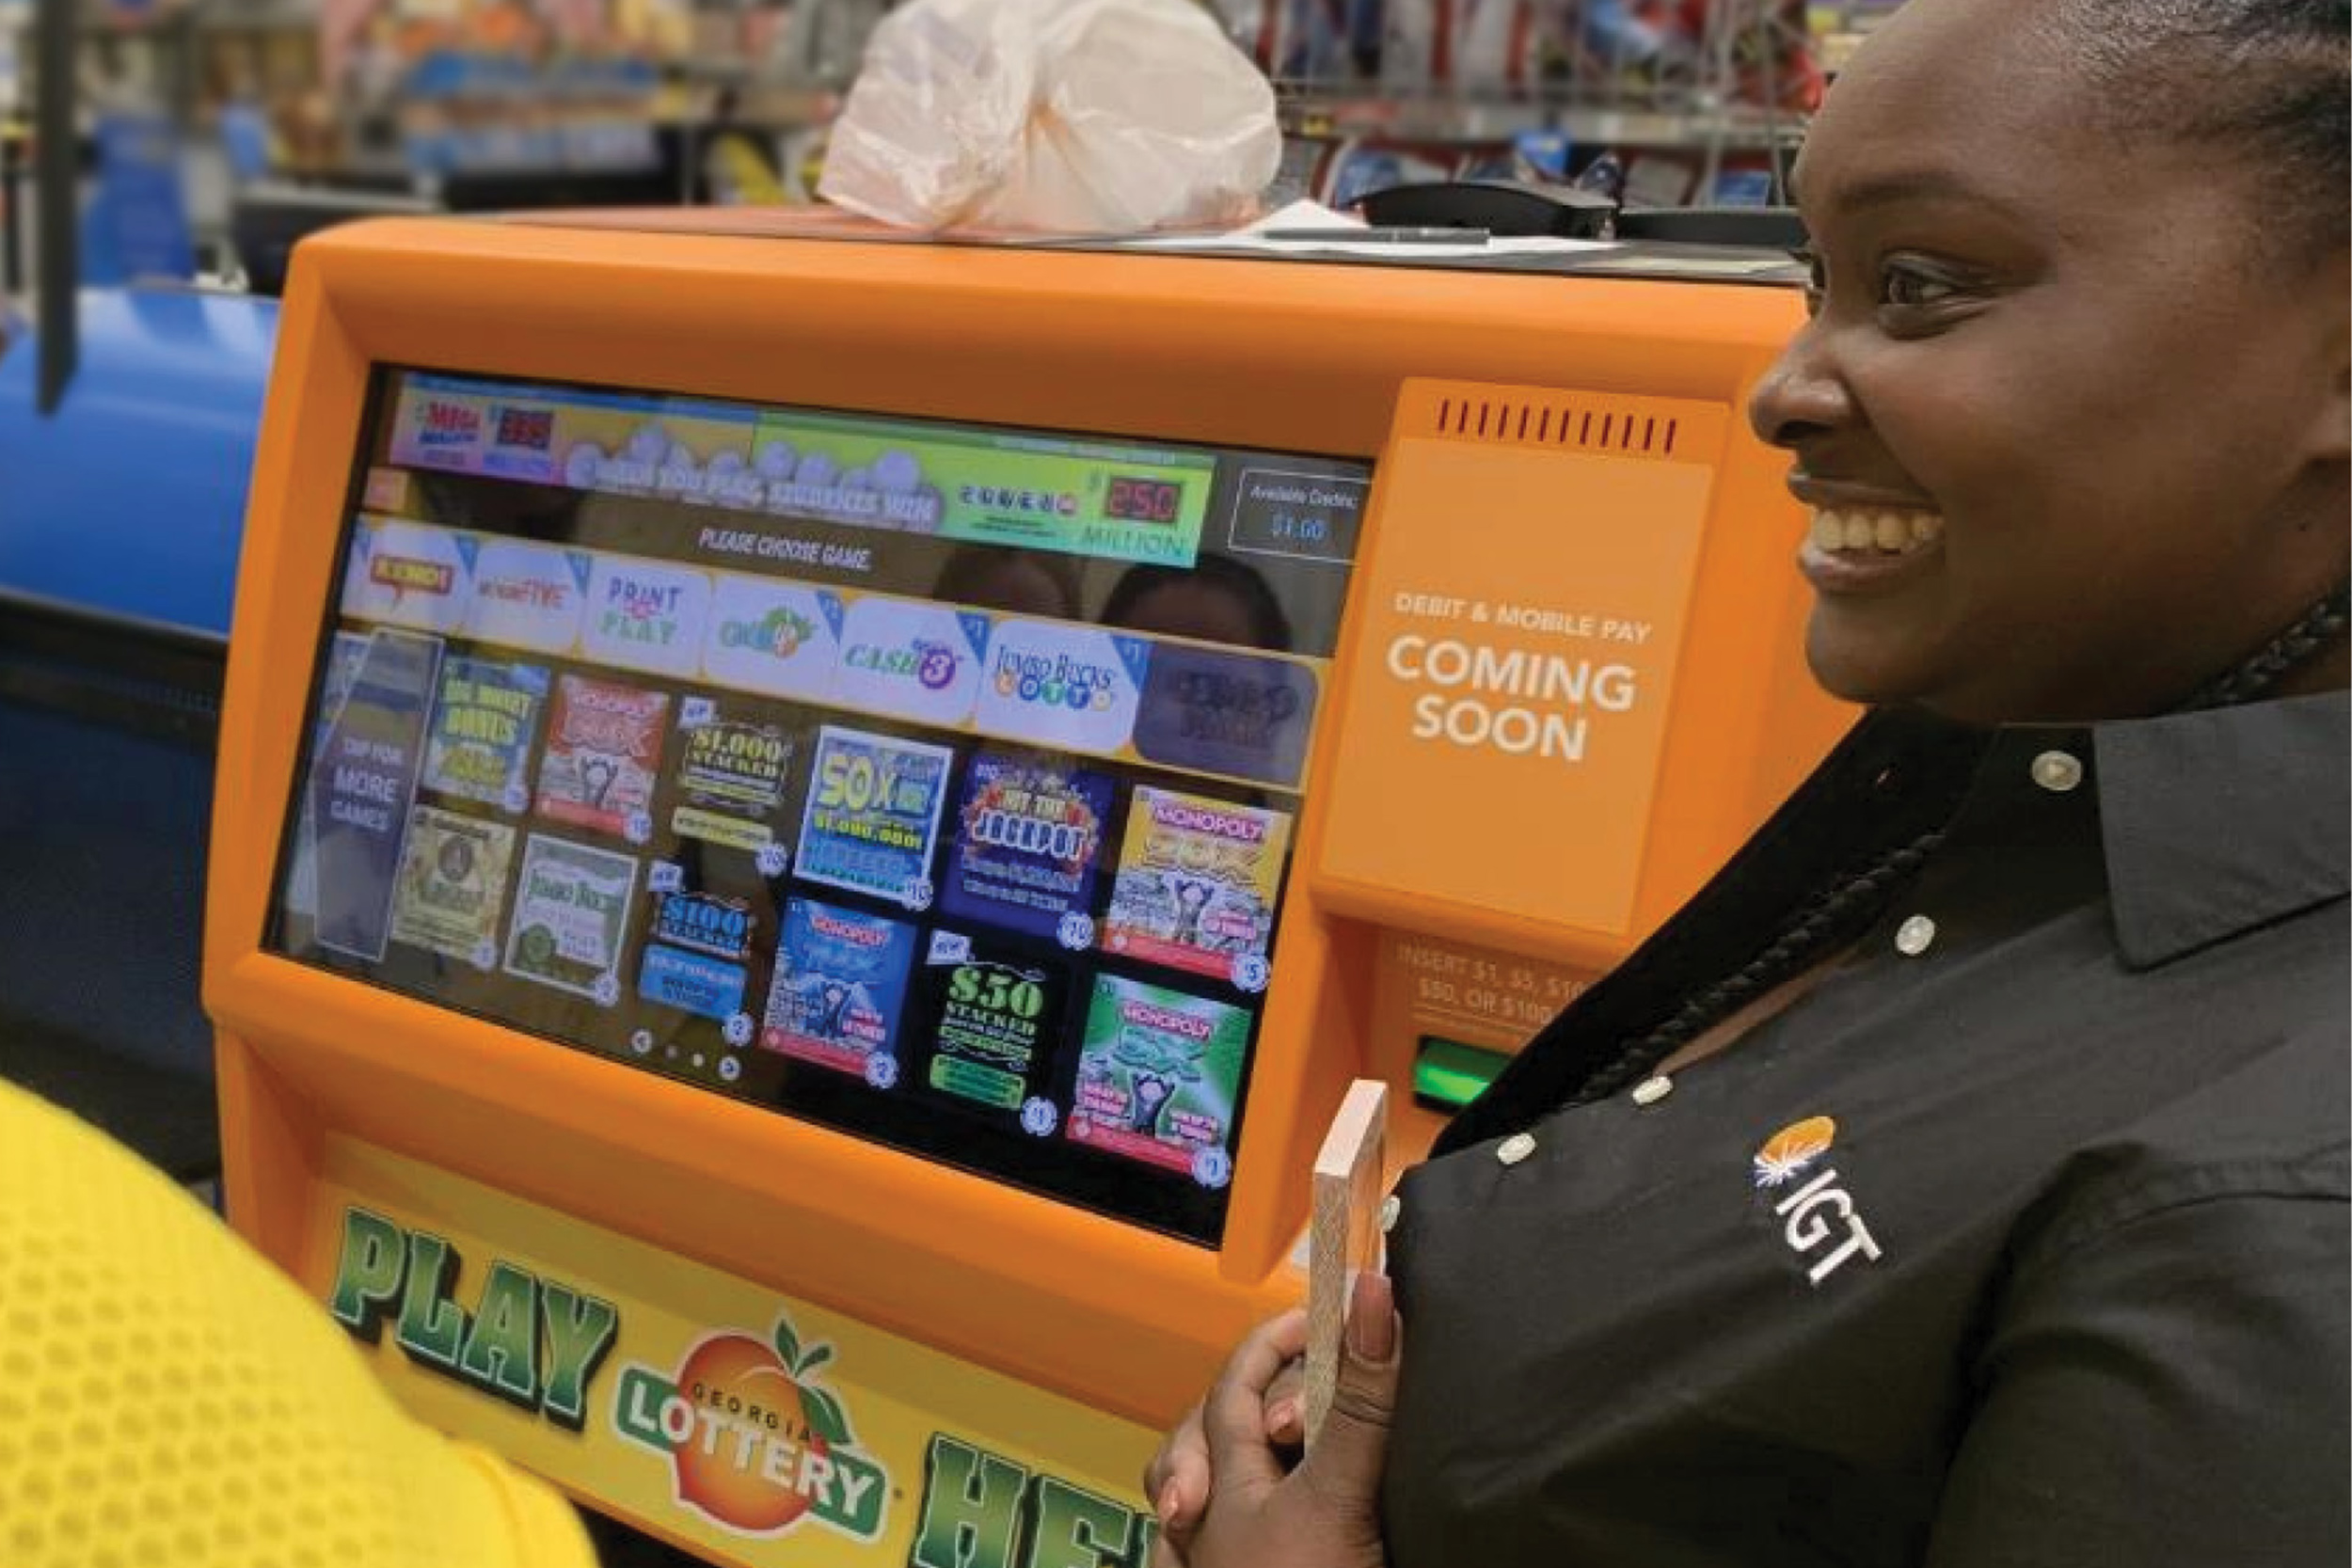 A sales representatives stands in front of an orange instant ticket vending machine